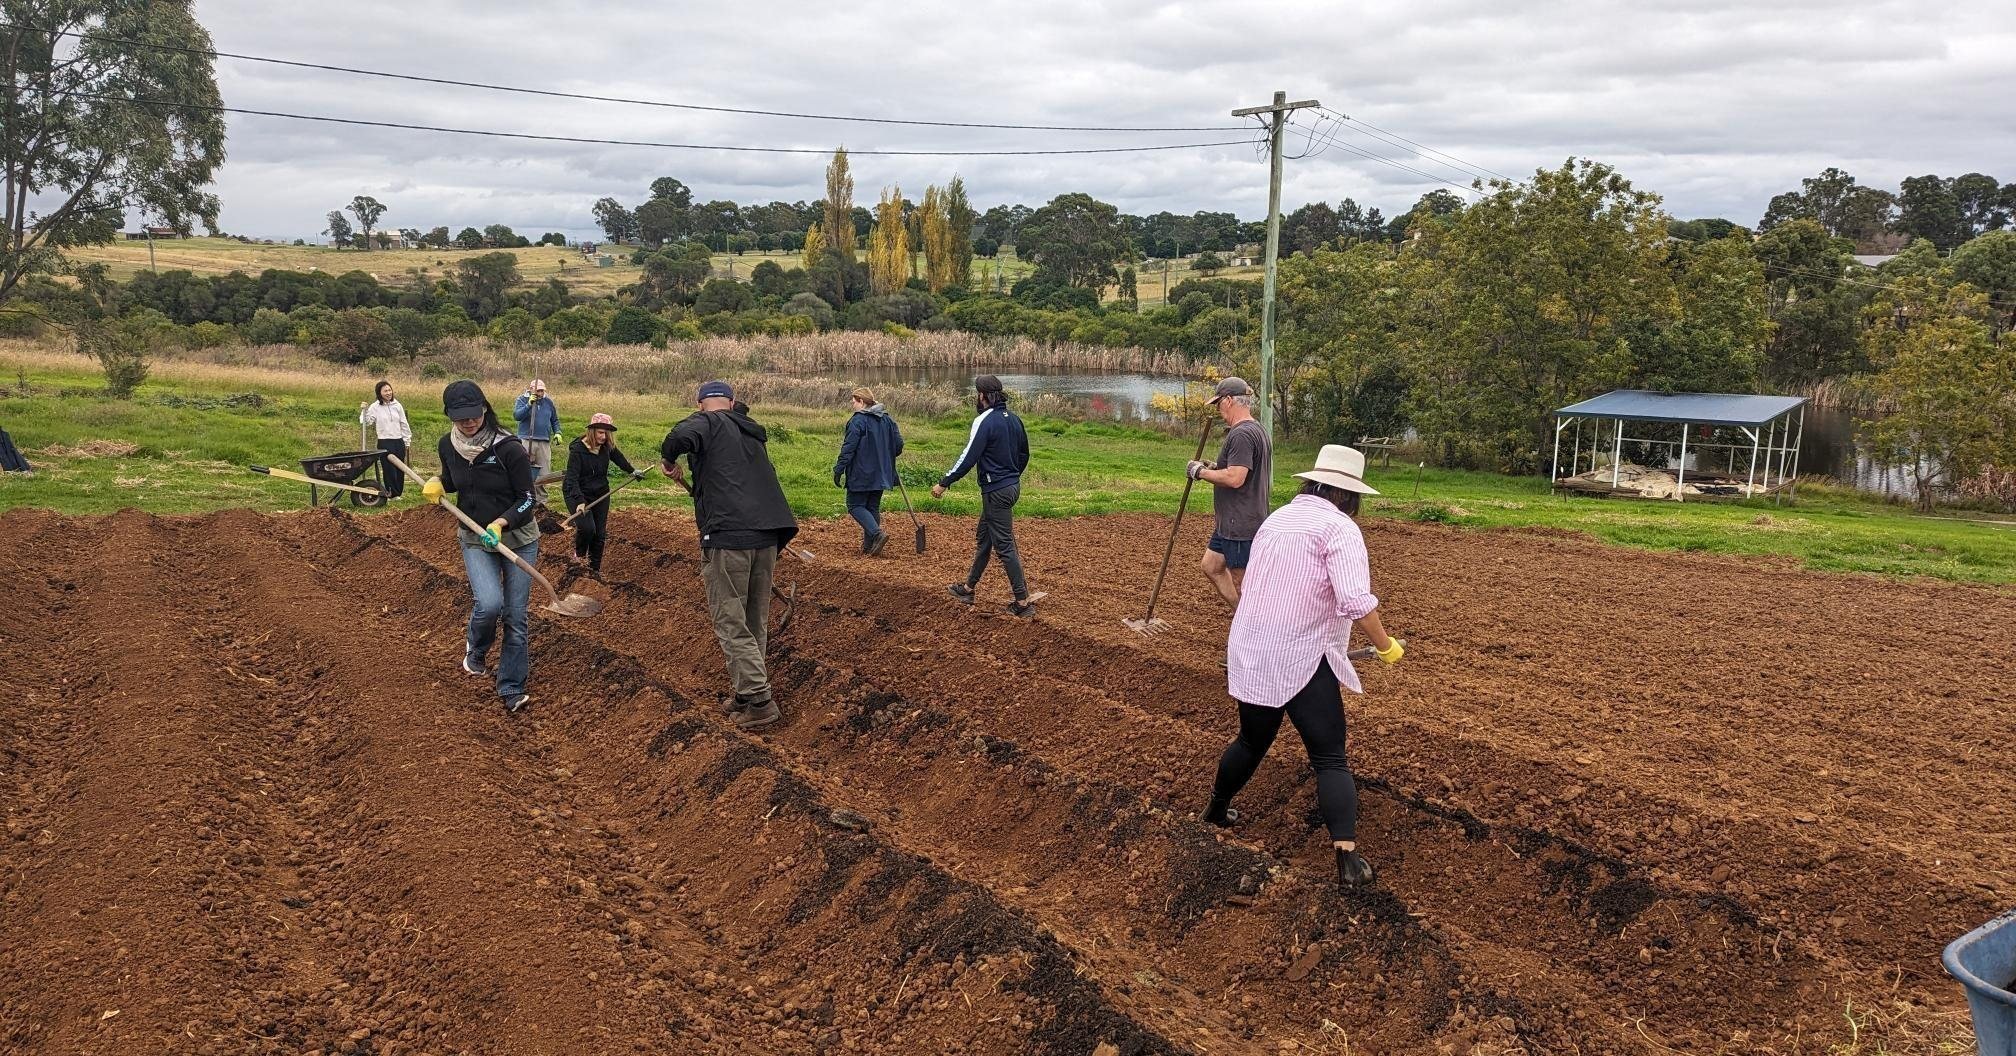 Thanks to the hardworking team from Westpac Institutional Bank for some great bed-forming in our veg garden, as part of their support for Cana at the farm. 👩&zwj;🌾

#CanaFarm #SocialEnterprise #CorporateVolunteering #NewBeginnings